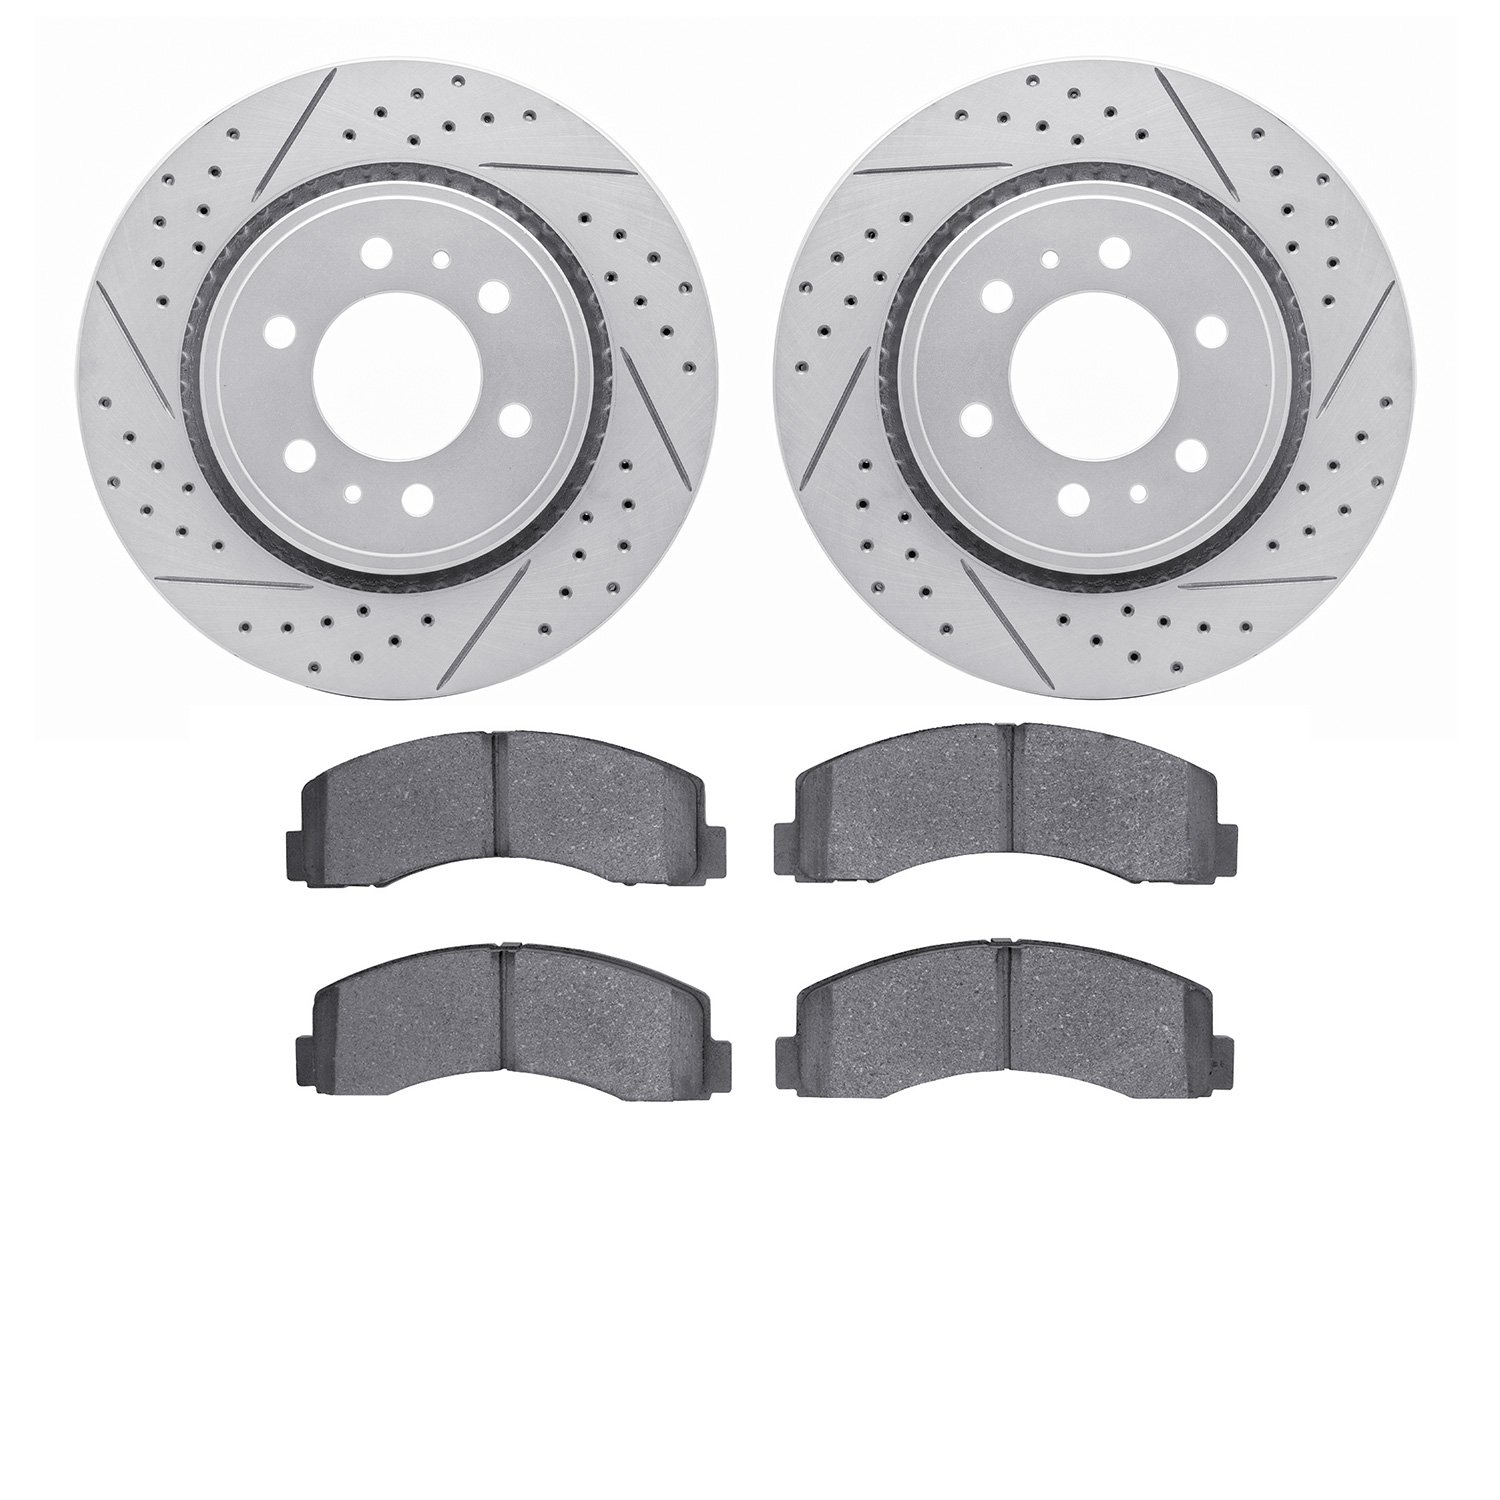 2502-54223 Geoperformance Drilled/Slotted Rotors w/5000 Advanced Brake Pads Kit, 2010-2021 Ford/Lincoln/Mercury/Mazda, Position: